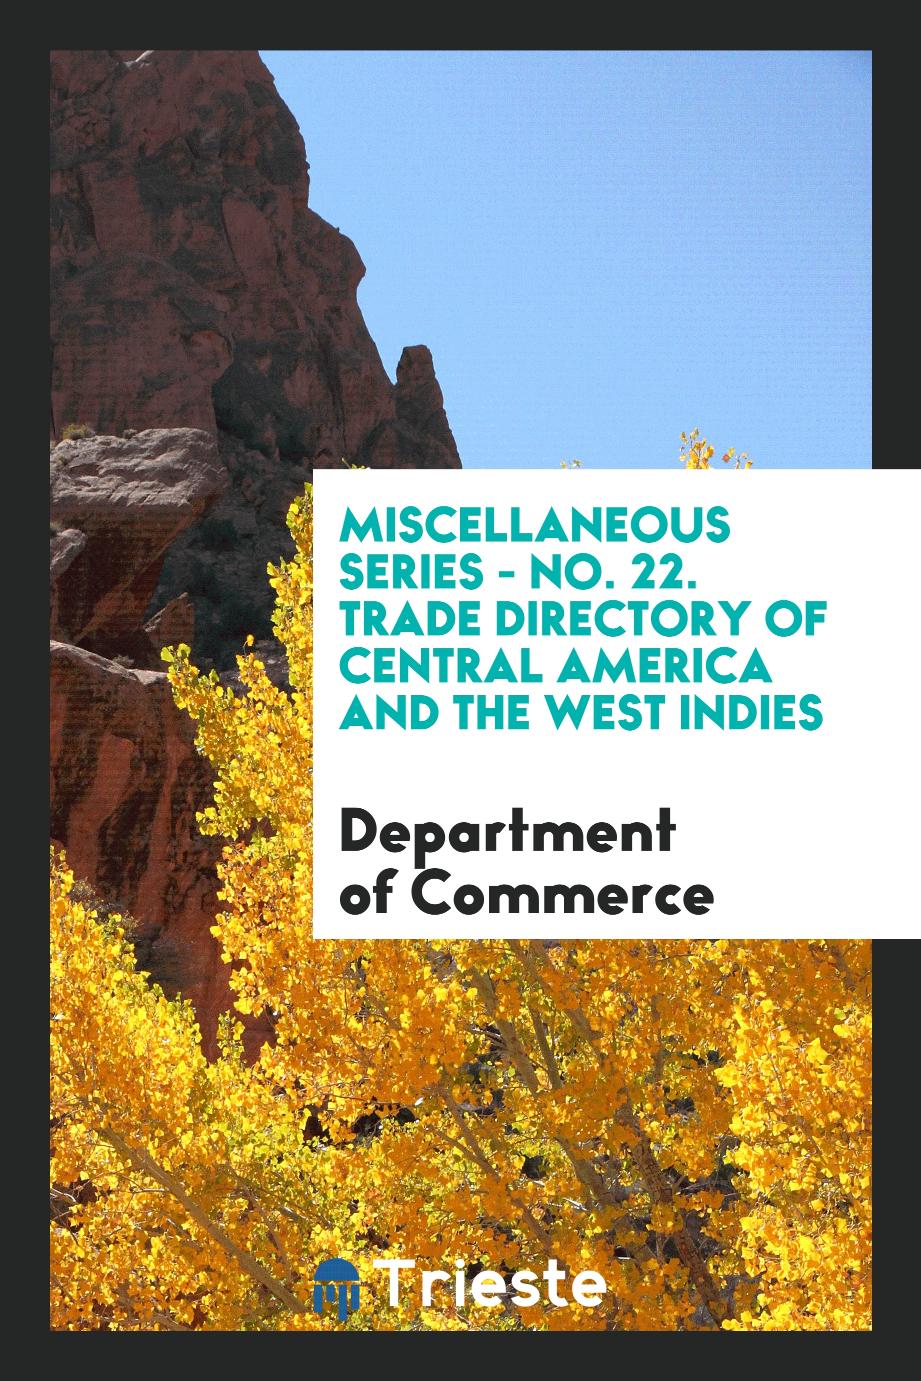 Miscellaneous Series - No. 22. Trade Directory of Central America and the West Indies